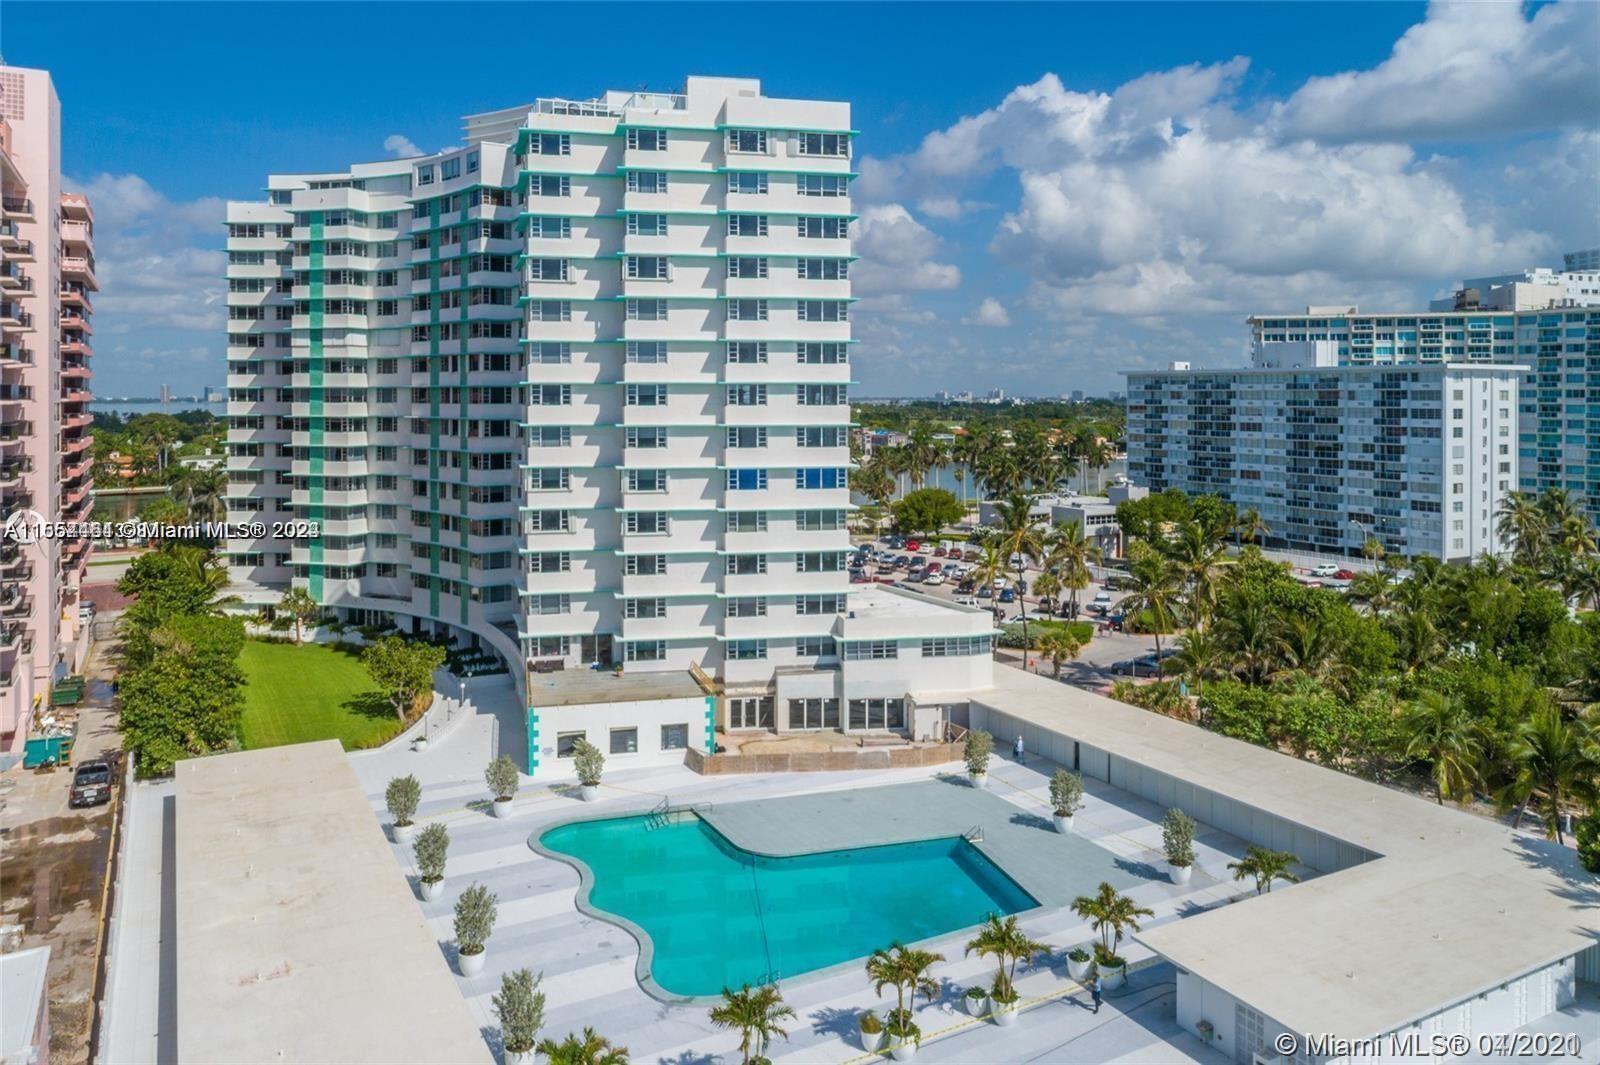 Incredible opportunity to build your 2425 sq foot custom 4bd, 3bth home right on the beach.  Raw space that requires renovation. Architectural plans and permits ready to submit. Enjoy breathtaking ocean sunrises, & bay & intracoastal sunset views. The J is the only line in the building with a balcony in unit. Monthly HOA Fee includes all utilities ranging from electricity, water, garbage, sewer, and maintenance fees. Amenities include large resort style swimming pool (temporarily closed) and BBQ area, fitness center, valet parking, Club room, and 24/7 doorman. Direct access to beach and pedestrian friendly walk path makes it an ideal oasis home. Building undergoing 50 year recertification. Member of the selling entity holds a FL RE license.